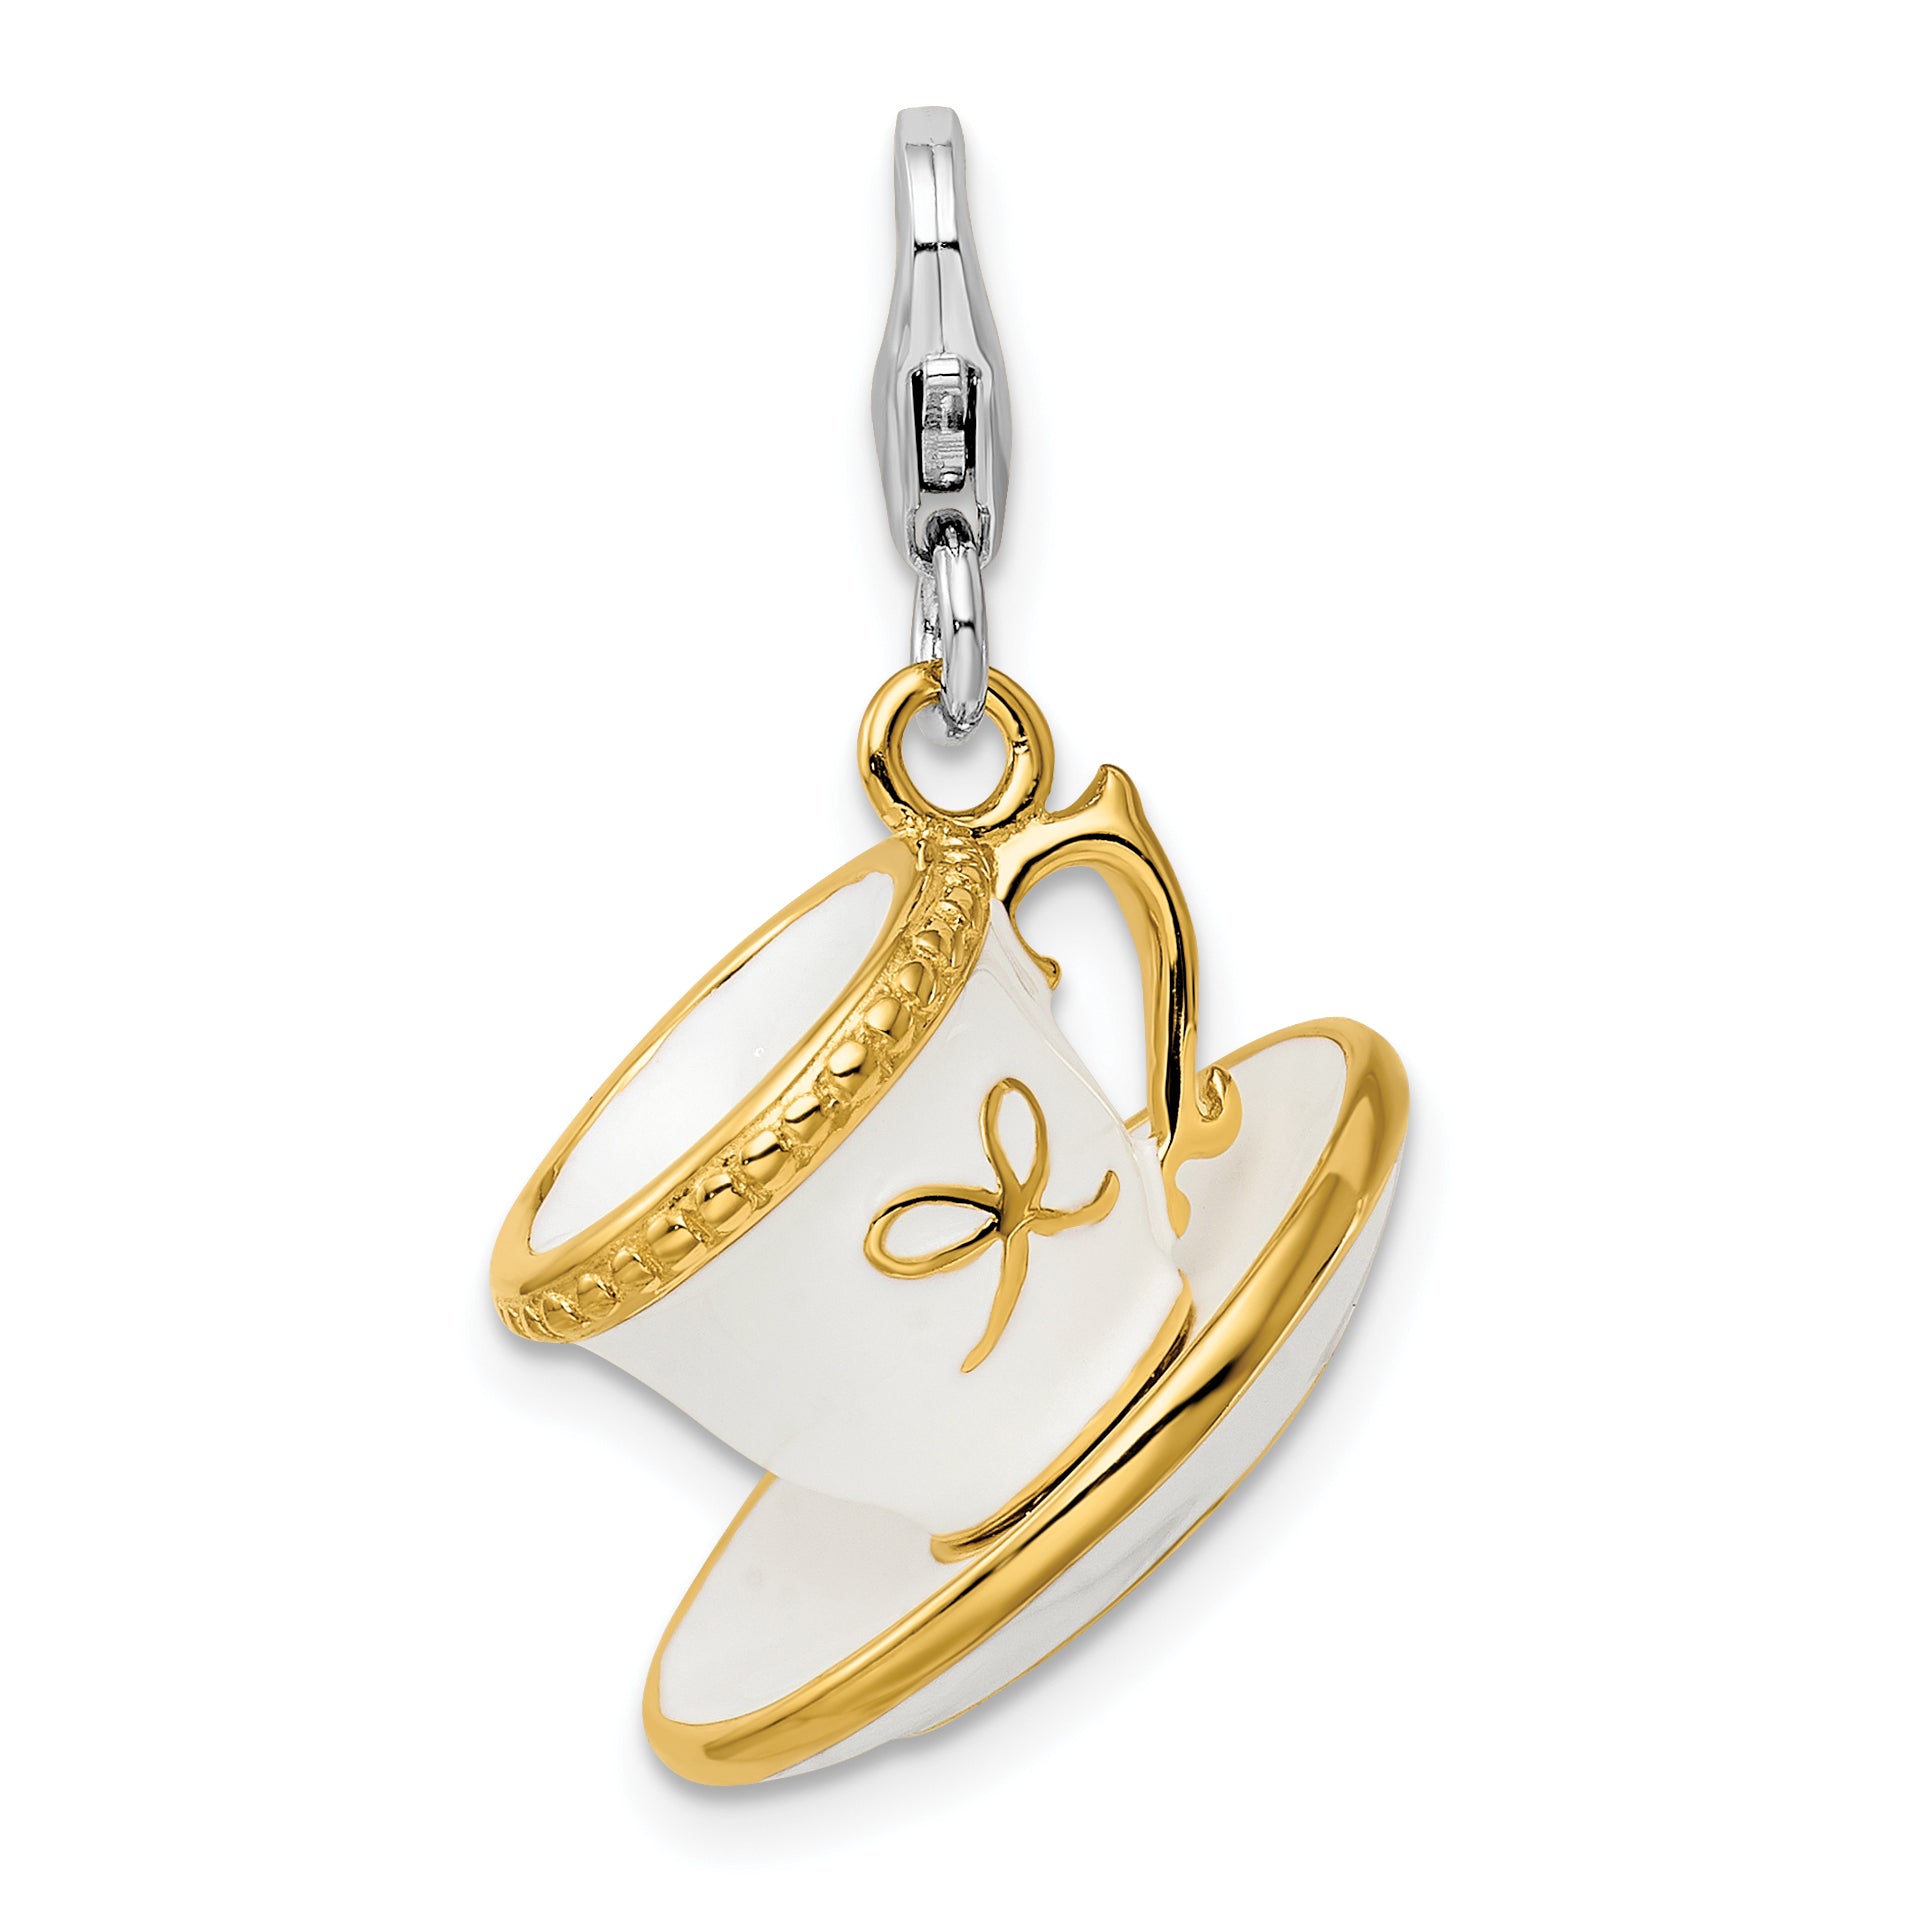 Amore La Vita Sterling Silver Rhodium-plated and Gold-plated Polished 3-D White Enameled Cup Saucer Charm with Fancy Lobster Clasp